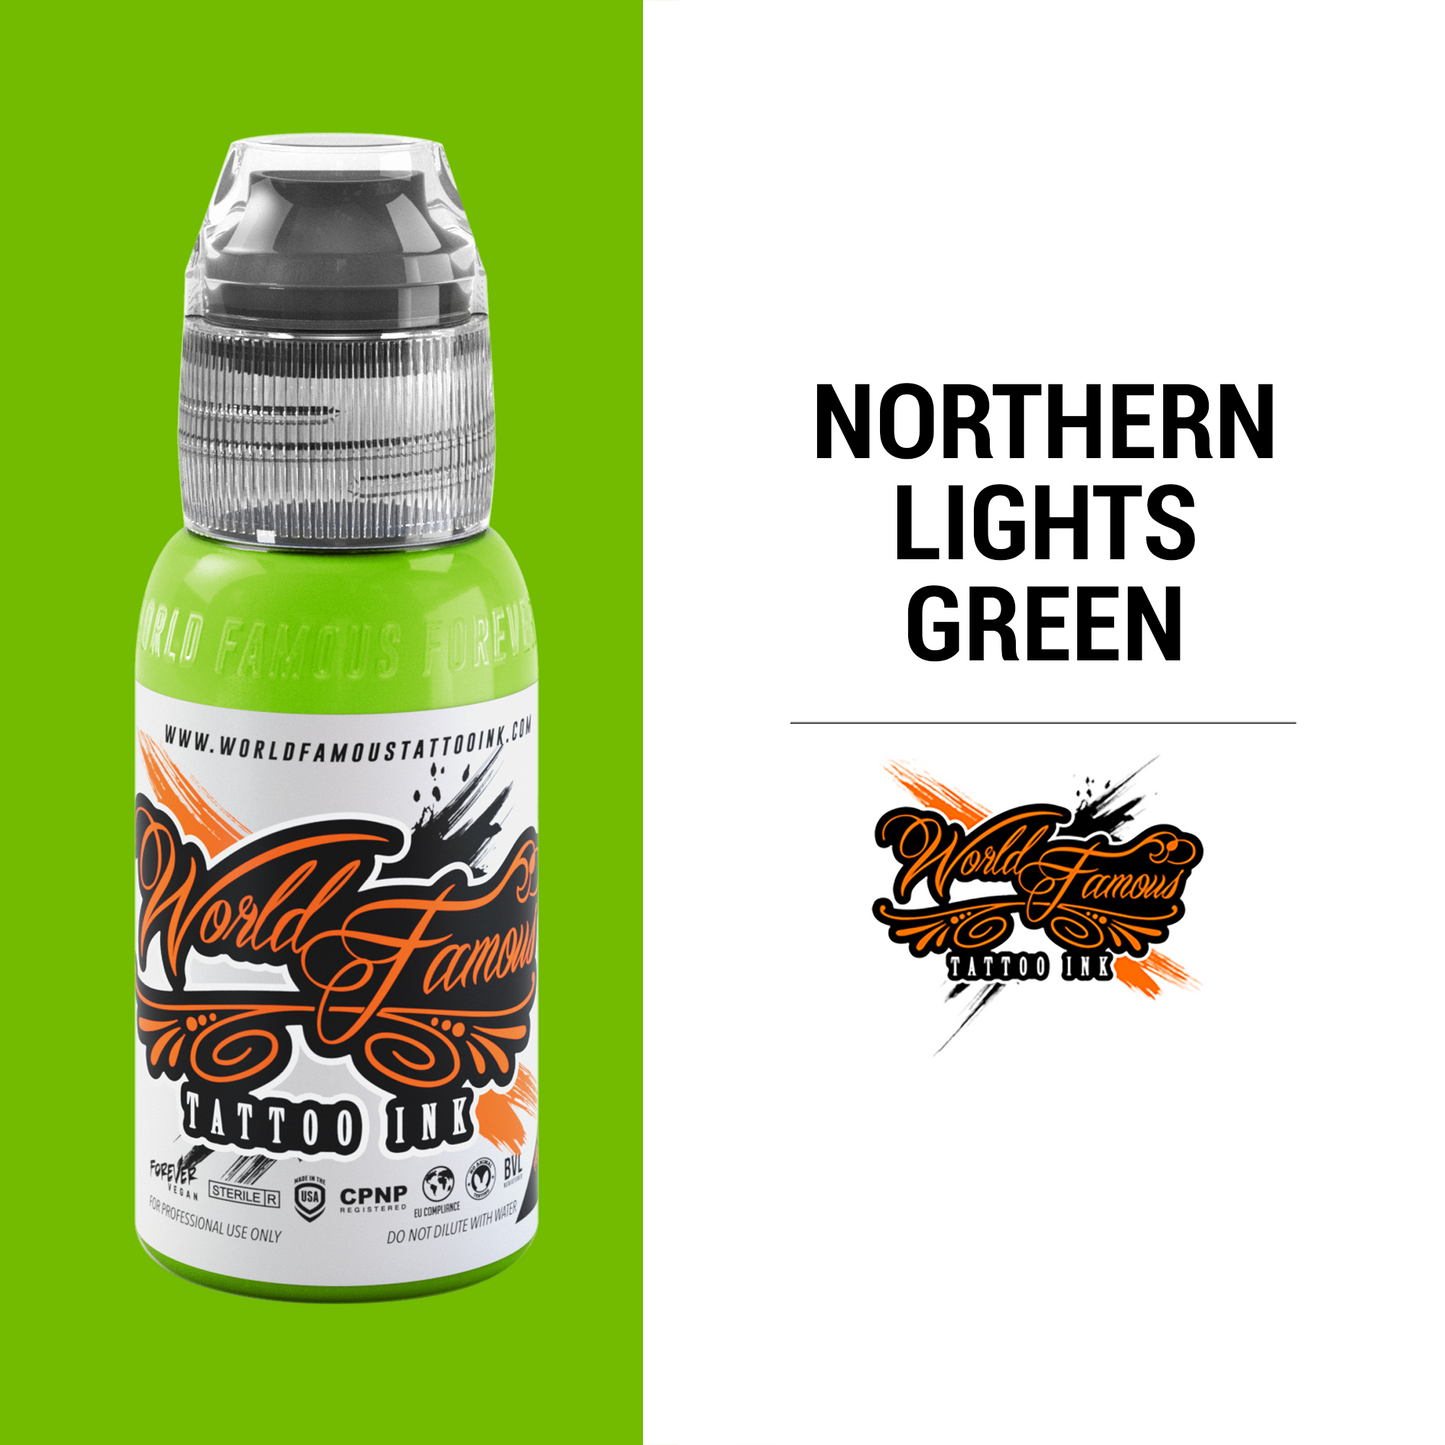 Northern Lights Green | World Famous Tattoo Ink